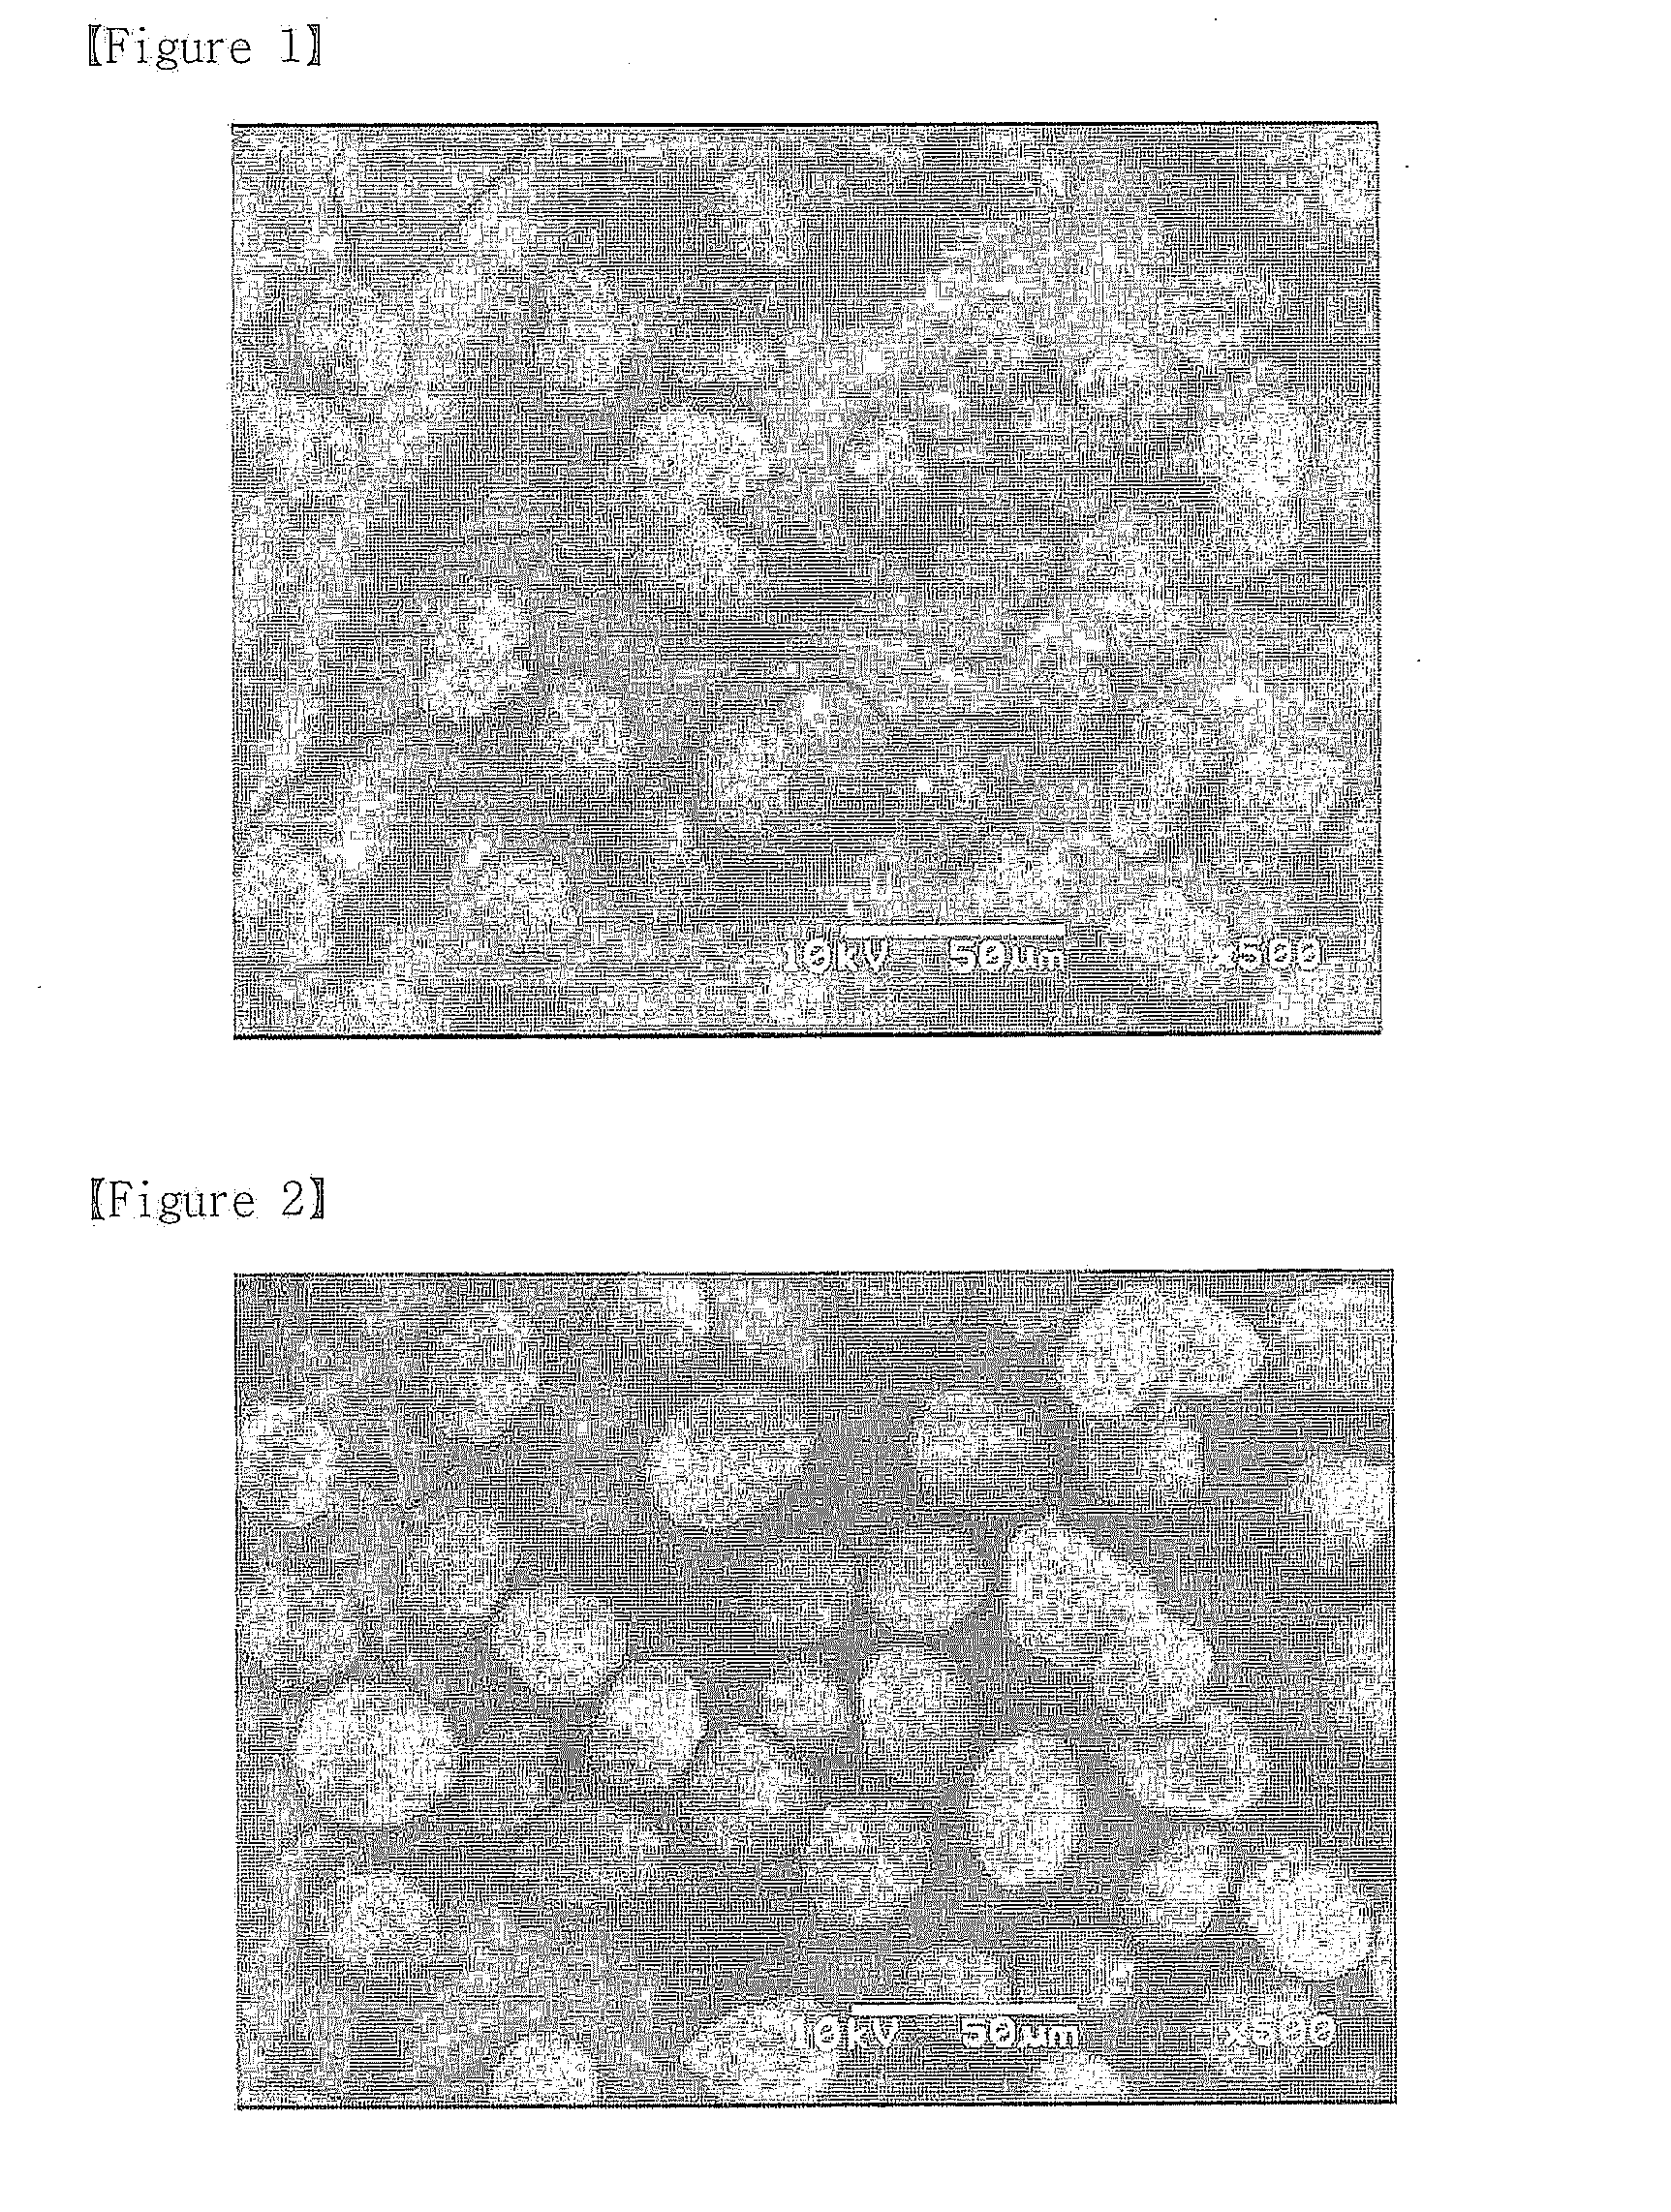 Method of preparation of spherical support for olefin polymerization catalyst